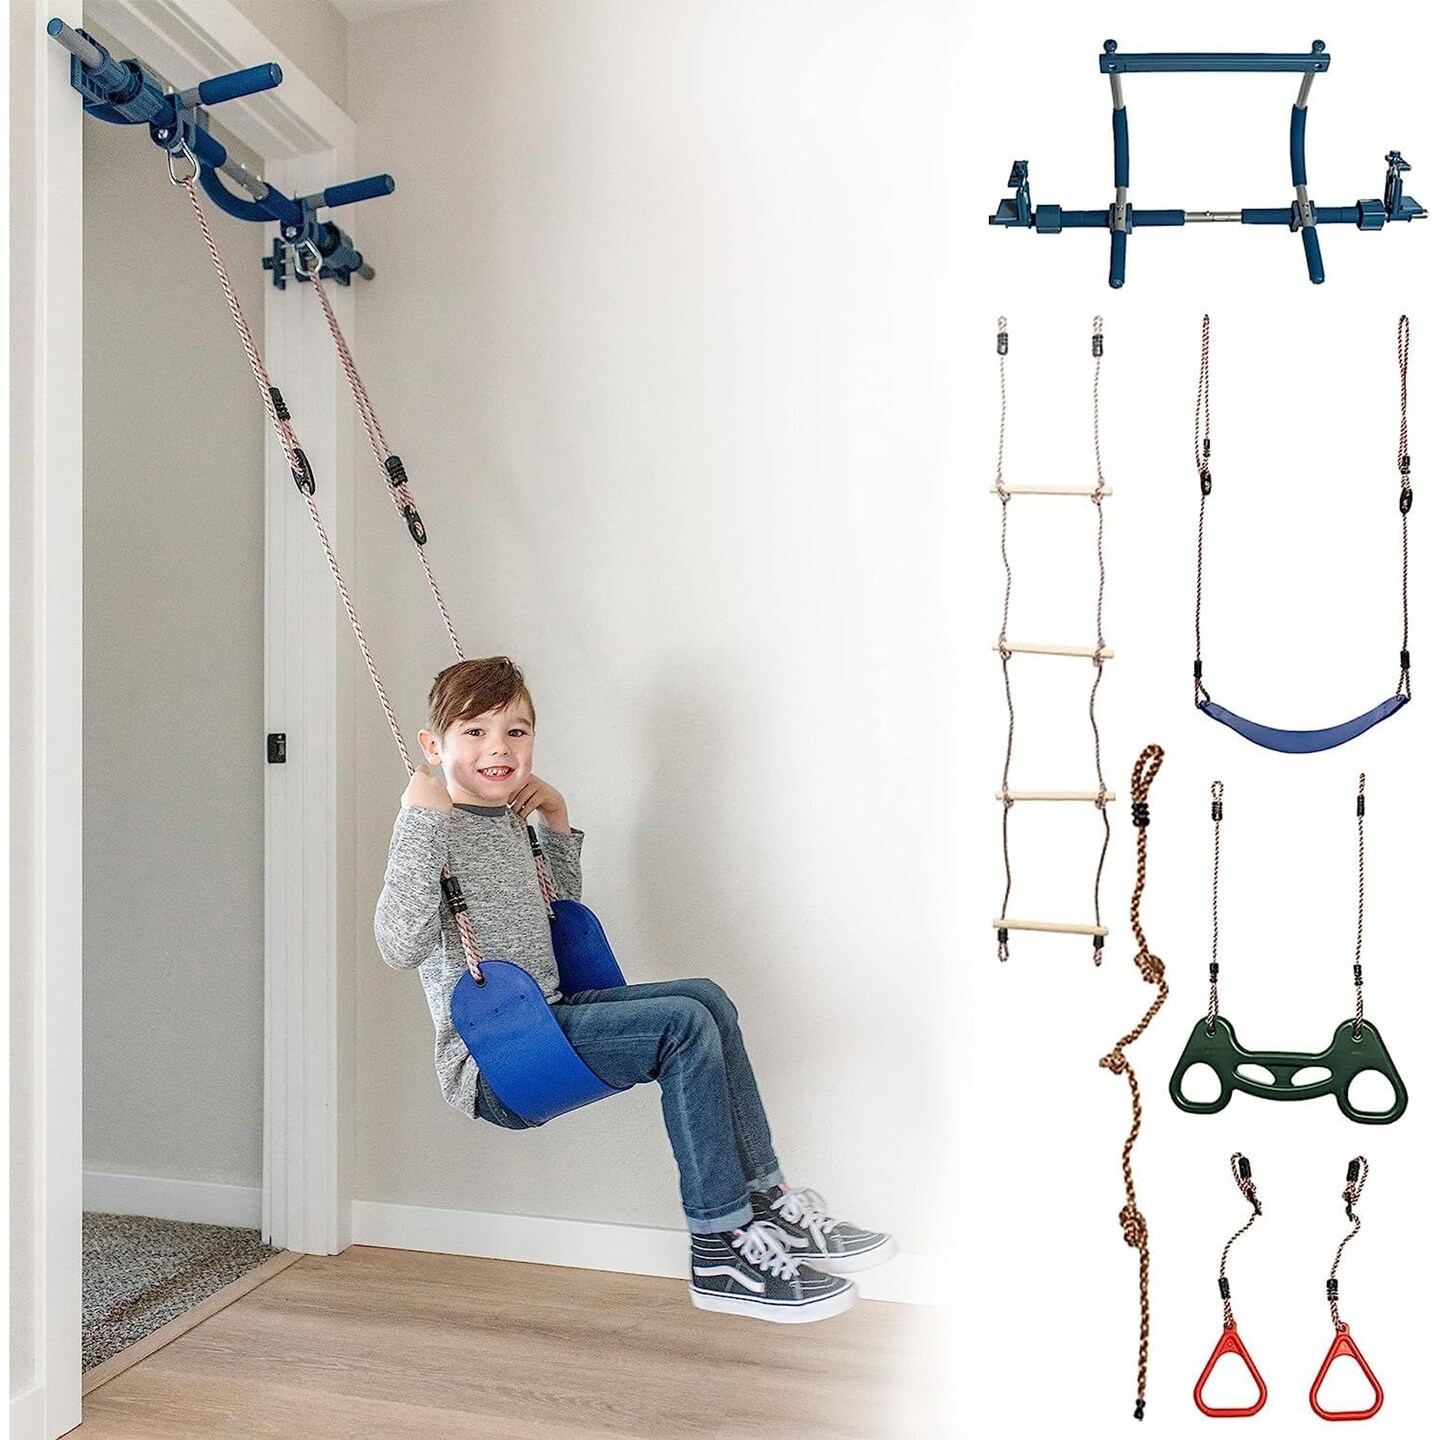 Gym1 6-Piece Doorway Gym for Kids, Includes Door Sensory Swing, Indoor Pull-Up Bar for Adults, Rings, Hanging Trapeze, Ladder &#x26; Knotted Rope, Holds Up to 300 Lbs